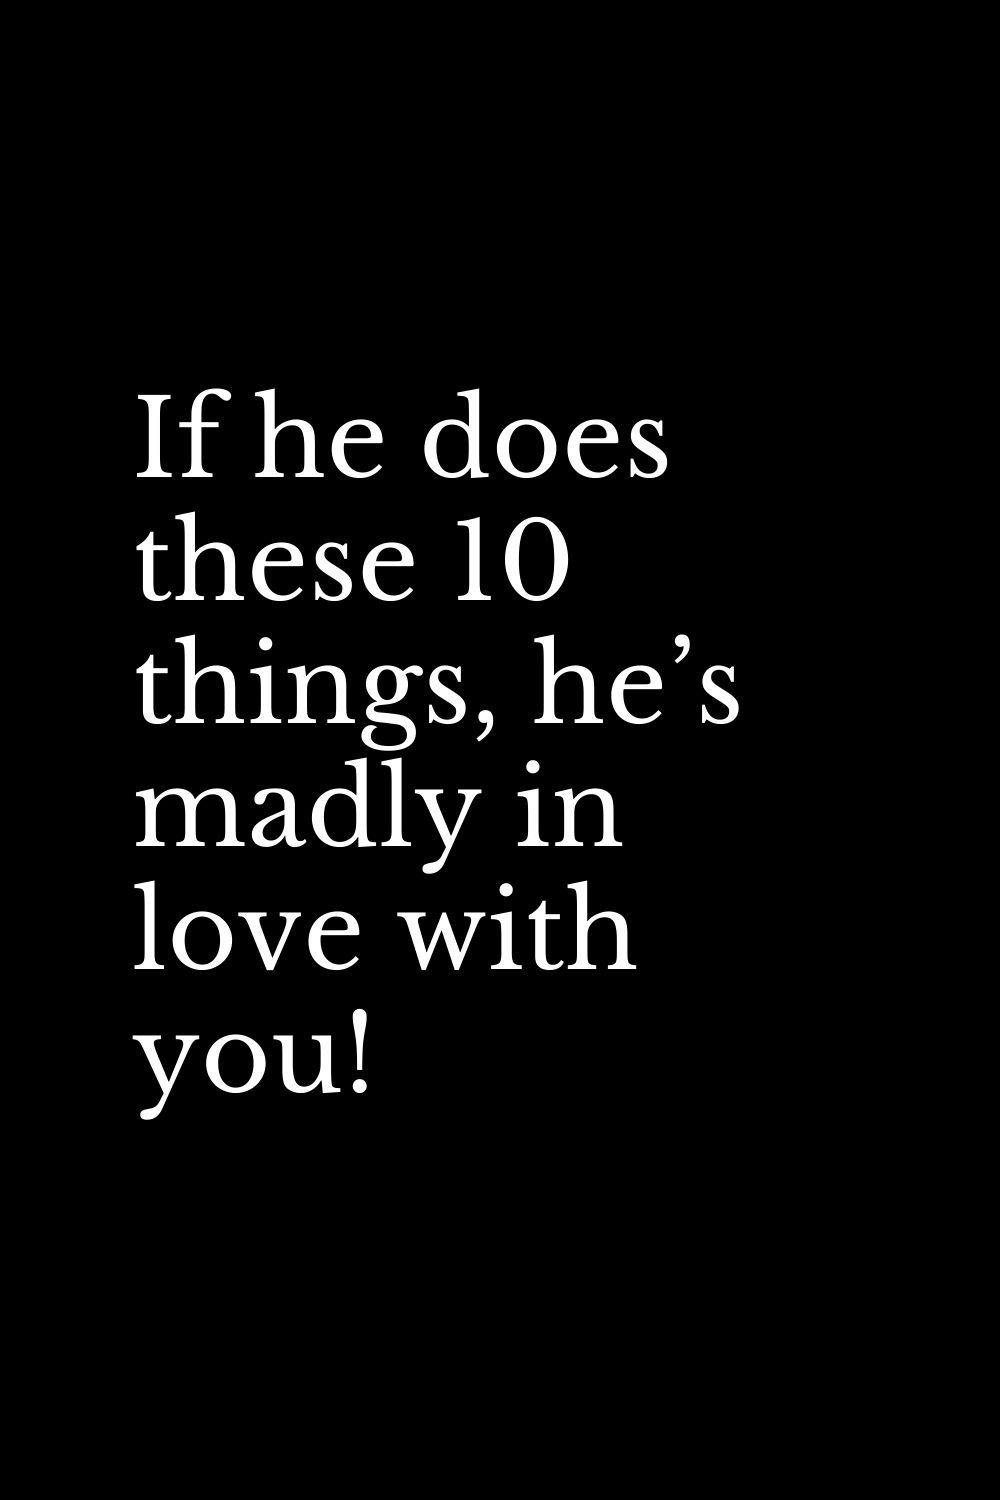 If he does these 10 things, he’s madly in love with you!